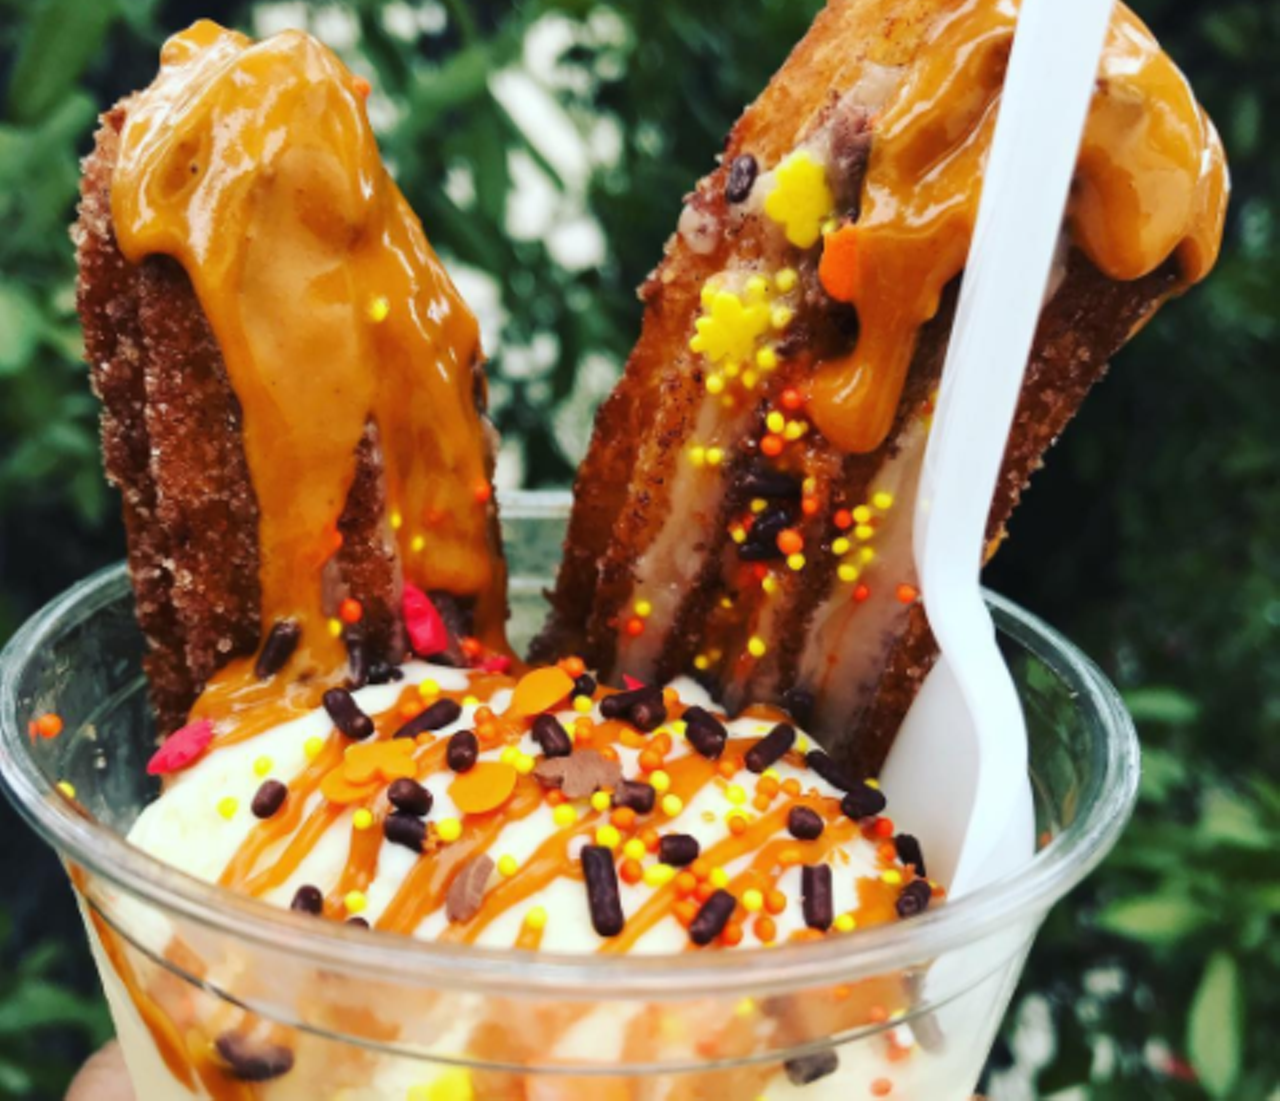 House of Honchos
5824 Babcock Road, (206) 304-6771, honchos-the-house-of-churros.business.site
House of Honchos is jumping on the basic bandwagon with pumpkin spice and festive fall colors. The scariest thing is how addictive these churros are. 
Photo via Instagram, gohonchos